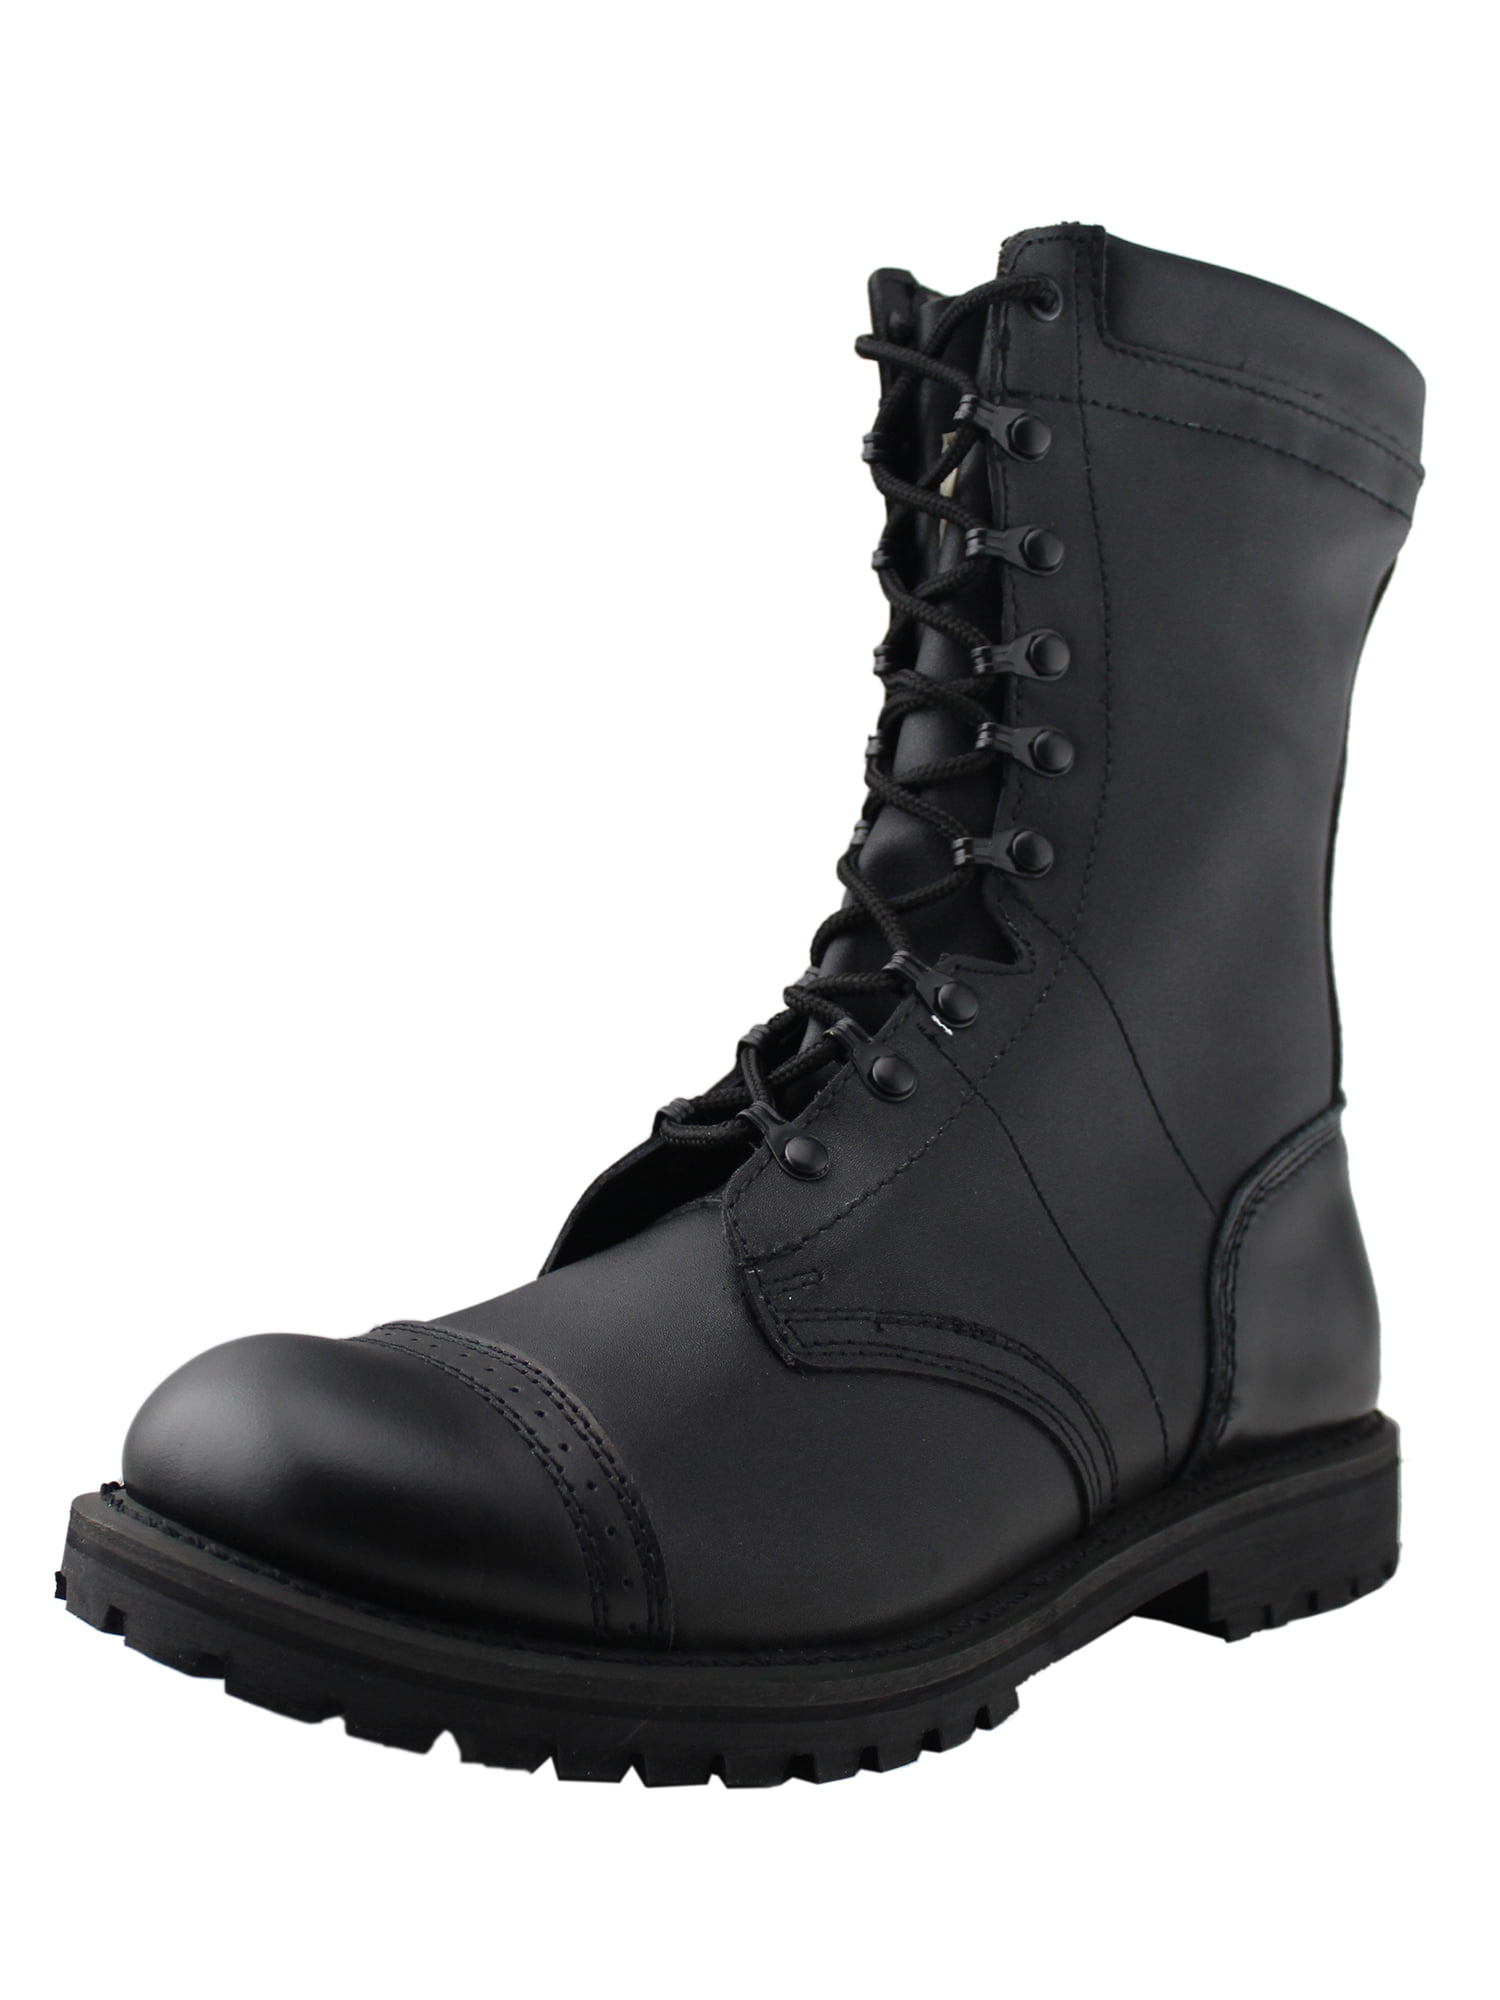 Buy > black army boots men > in stock